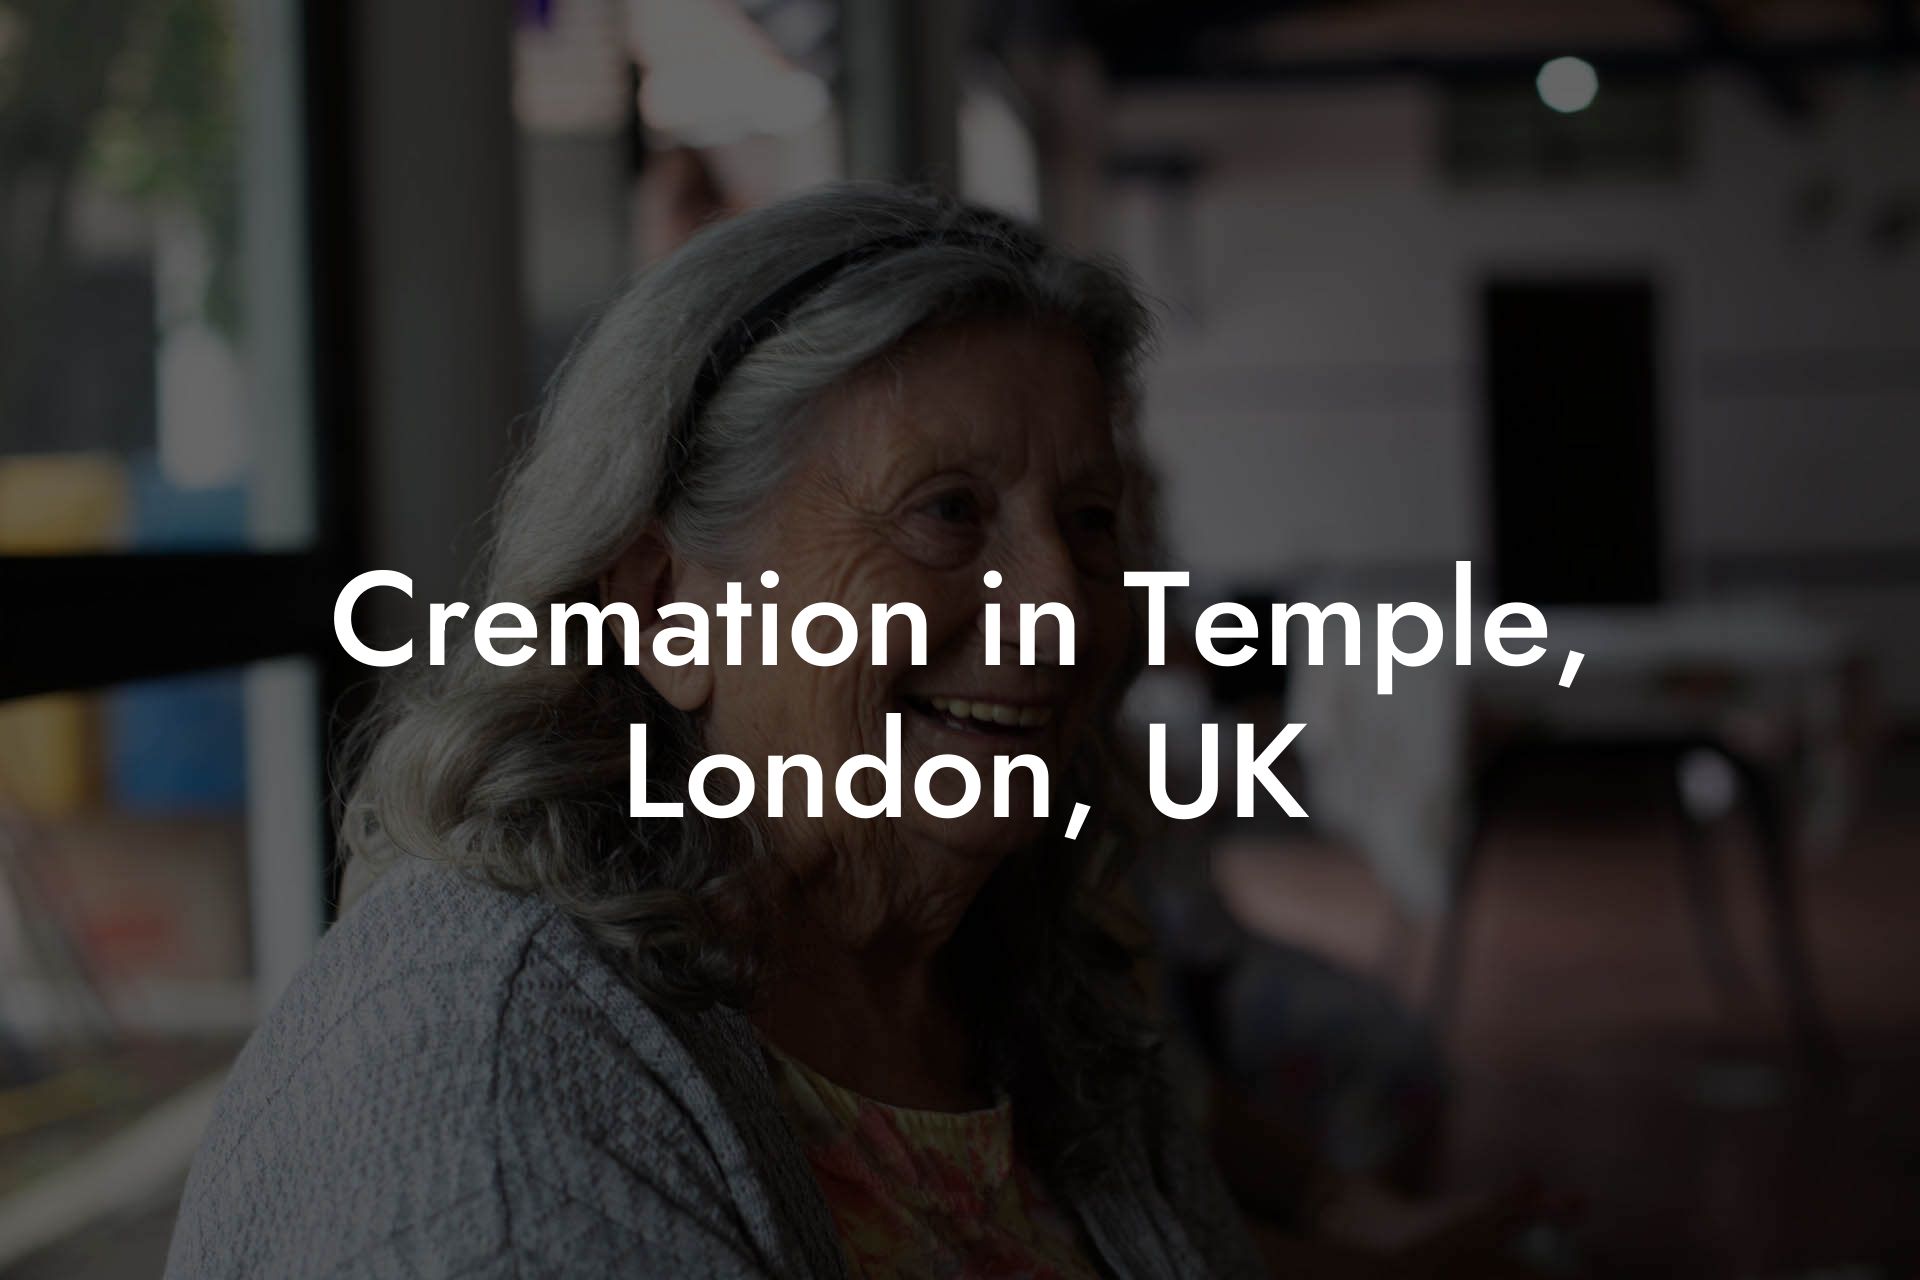 Cremation in Temple, London, UK